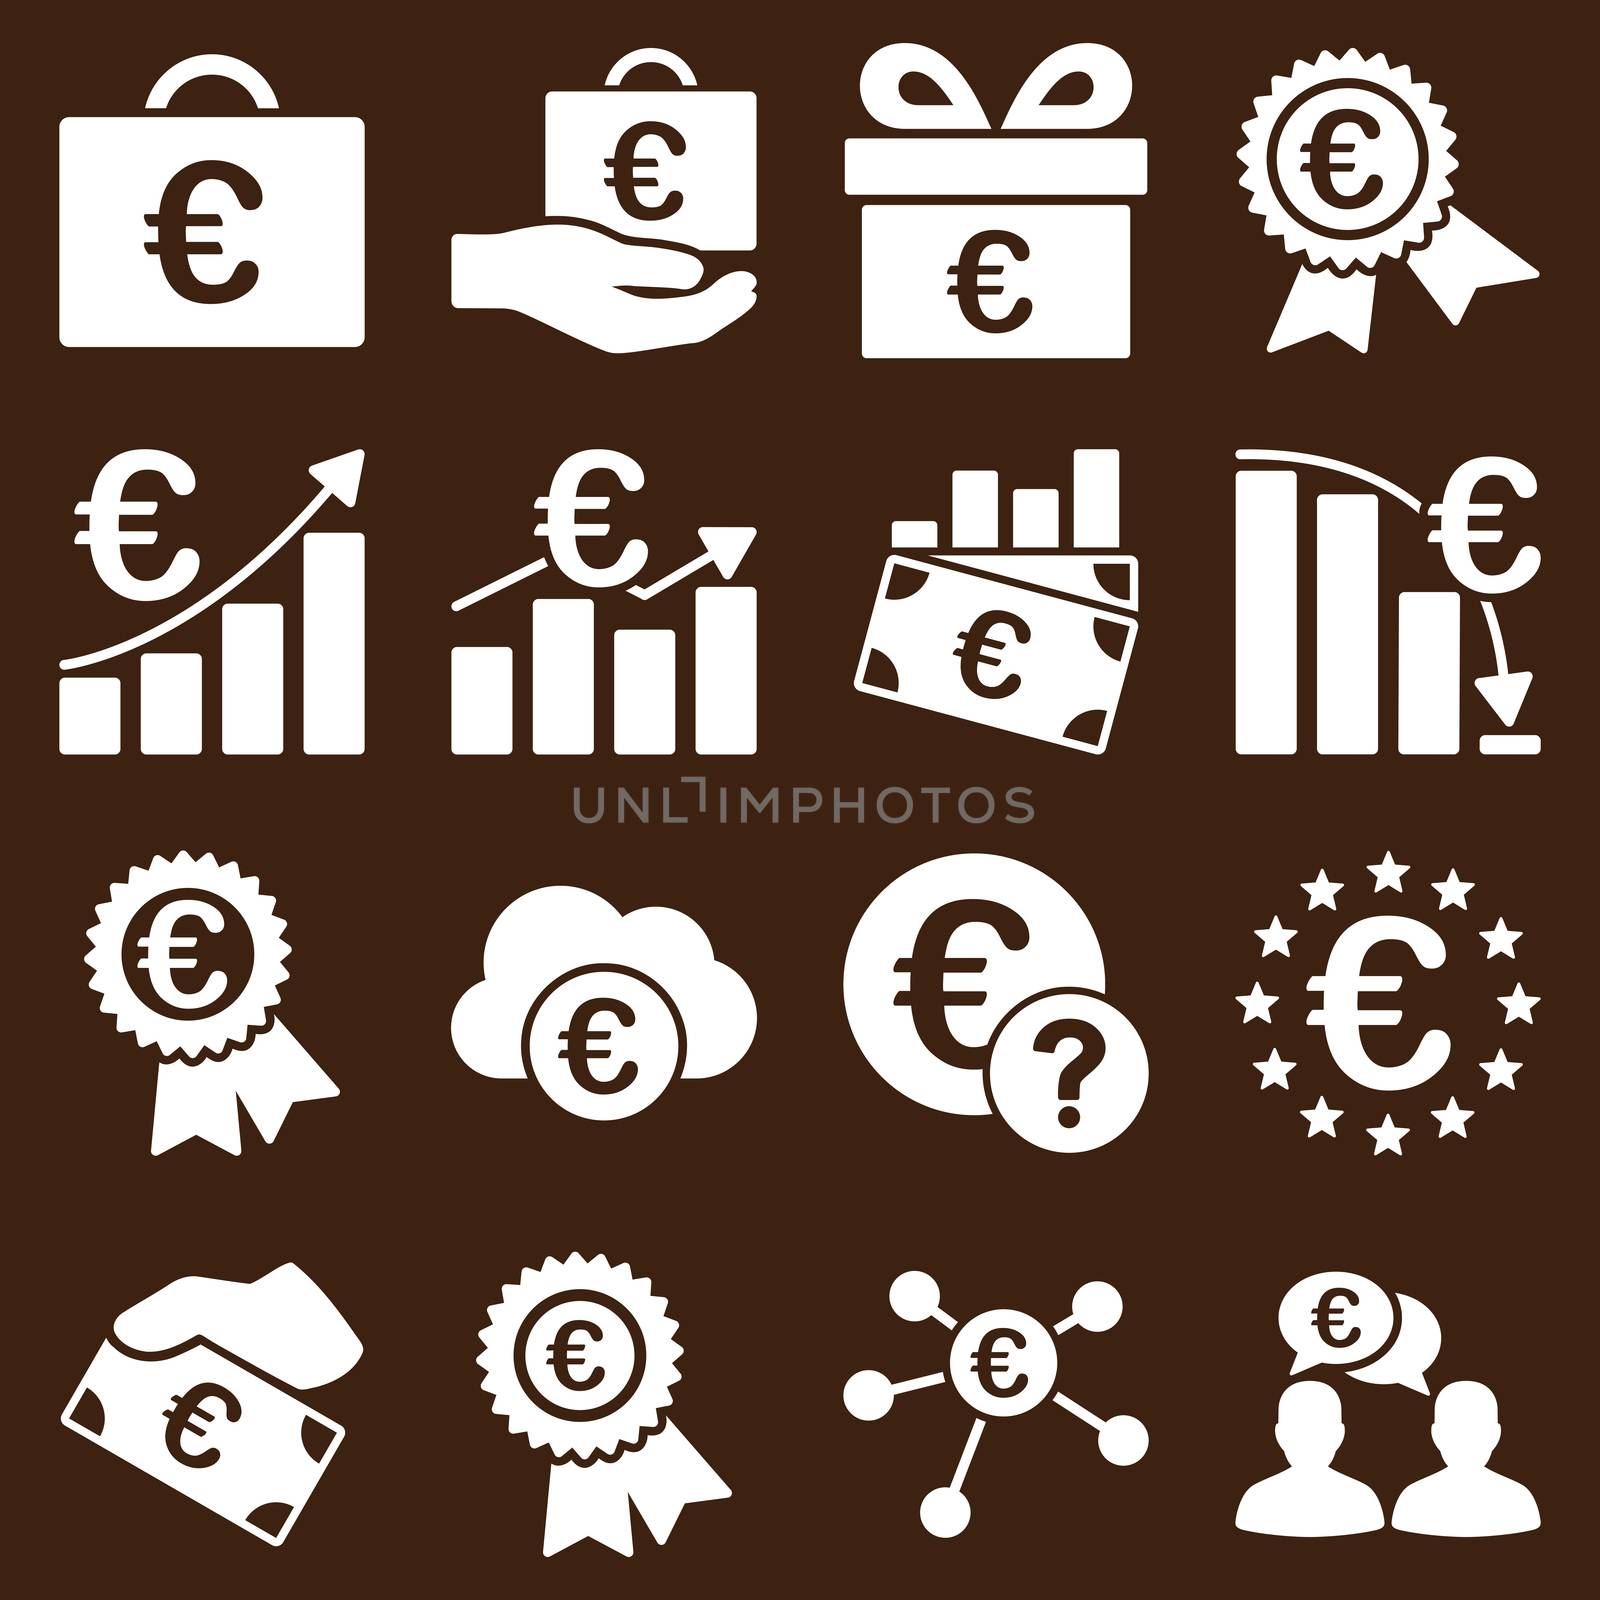 Euro banking business and service tools icons. These flat icons use white color. Images are isolated on a brown background. Angles are rounded.